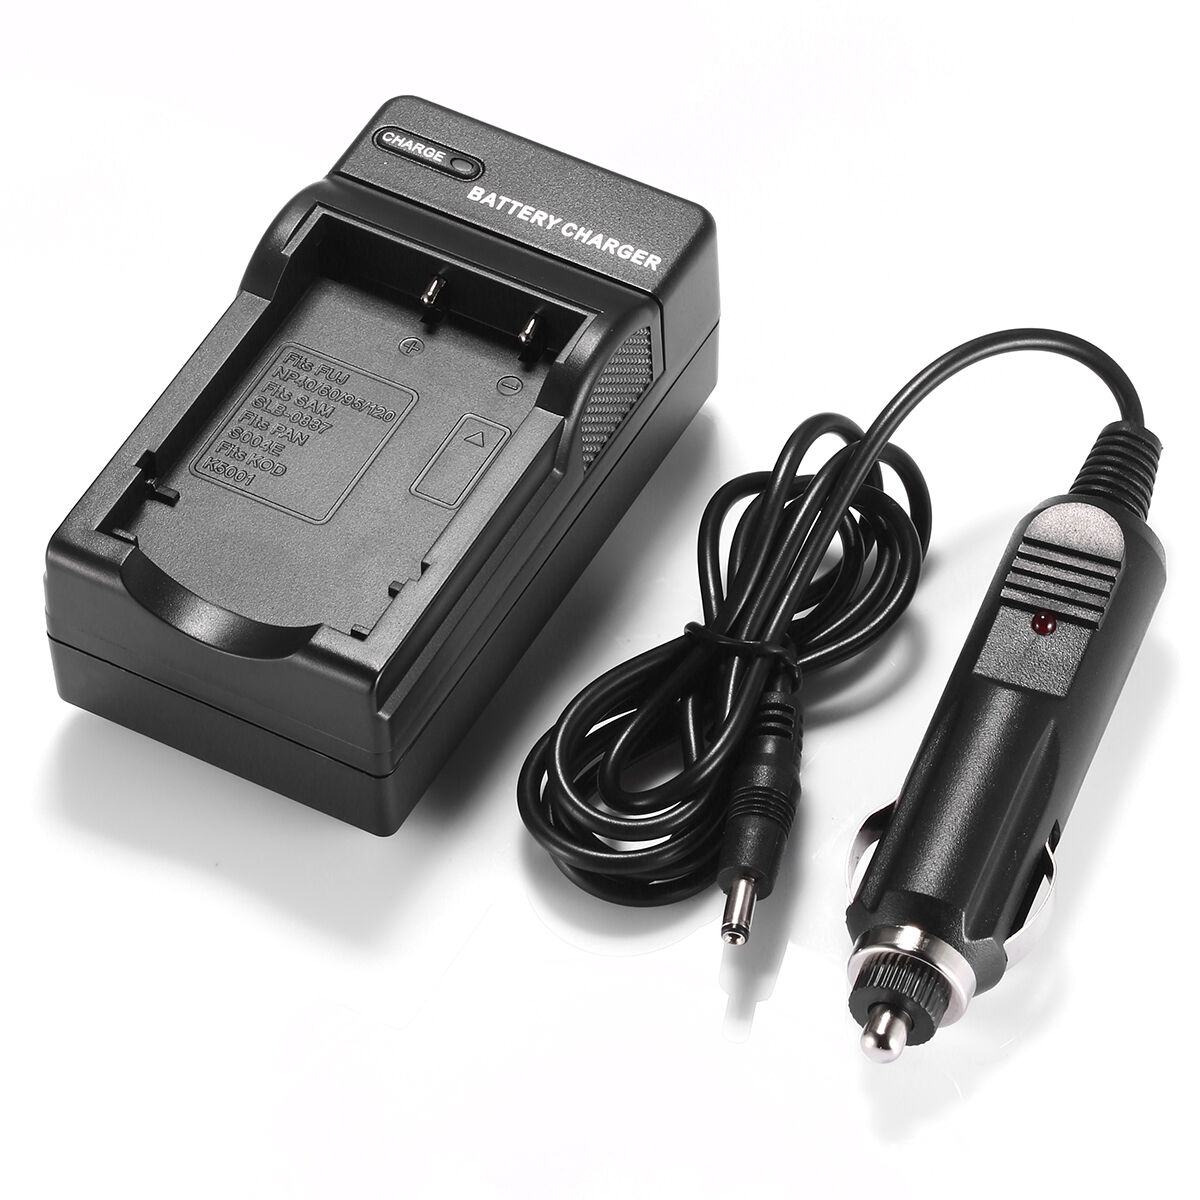 CASIO Exilim ZOOM EX-Z2300BK battery charger